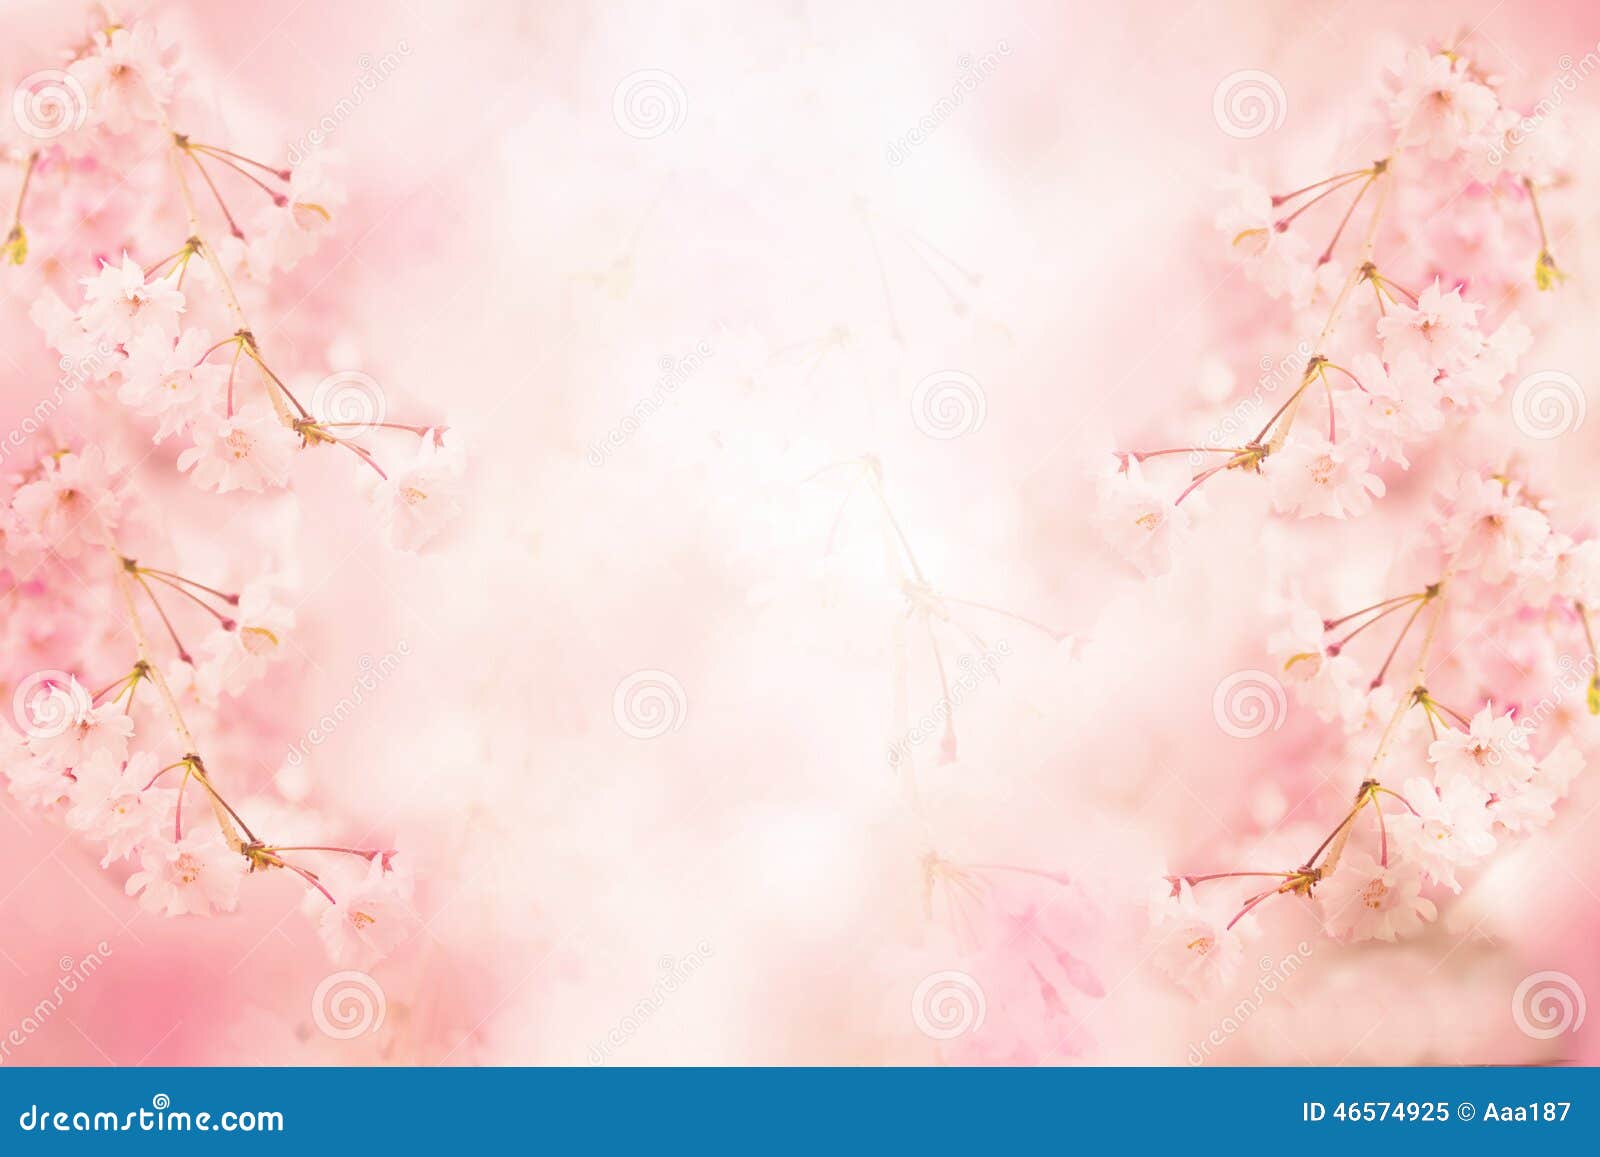 Abstract Pink Flower Background Stock Illustration - Illustration of  delicate, beautiful: 46574925